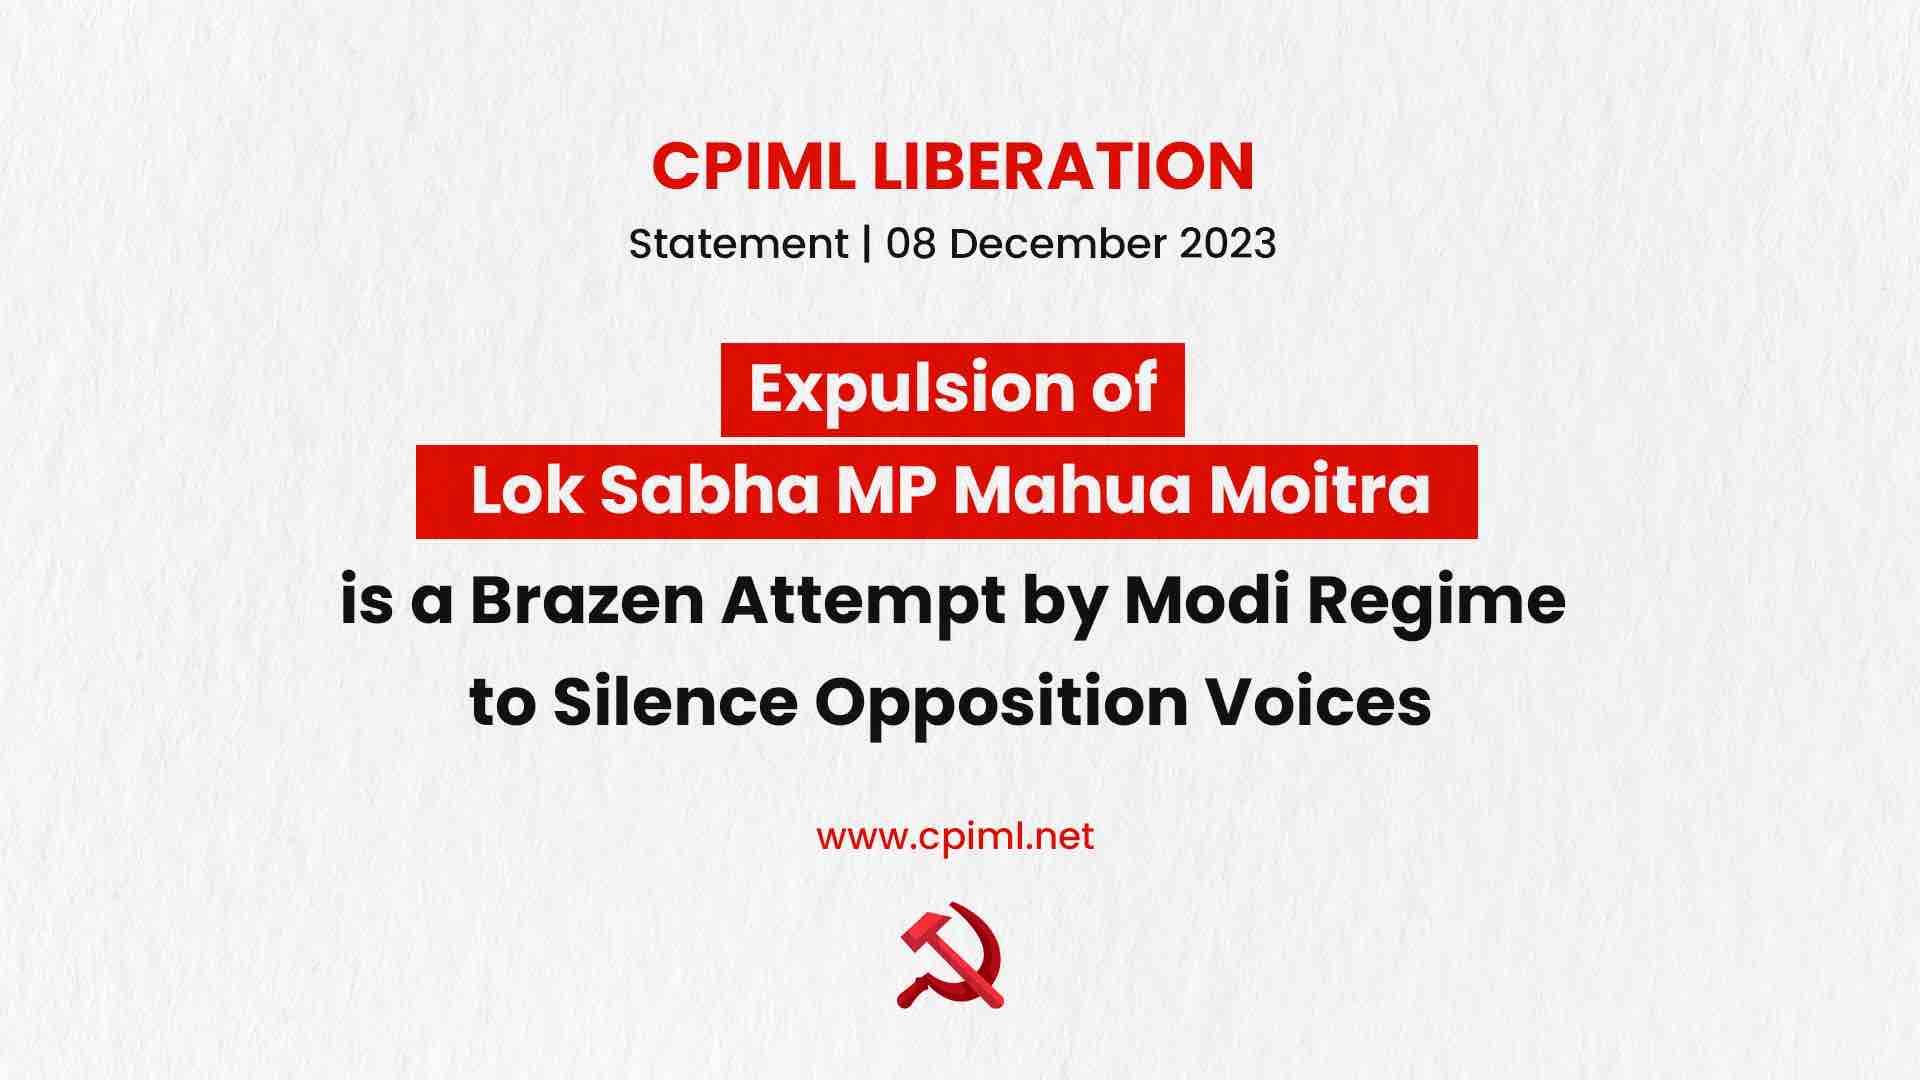 Expulsion of Lok Sabha MP Mahua Moitra is a Brazen Attempt by Modi Regime to Silence Opposition Voices